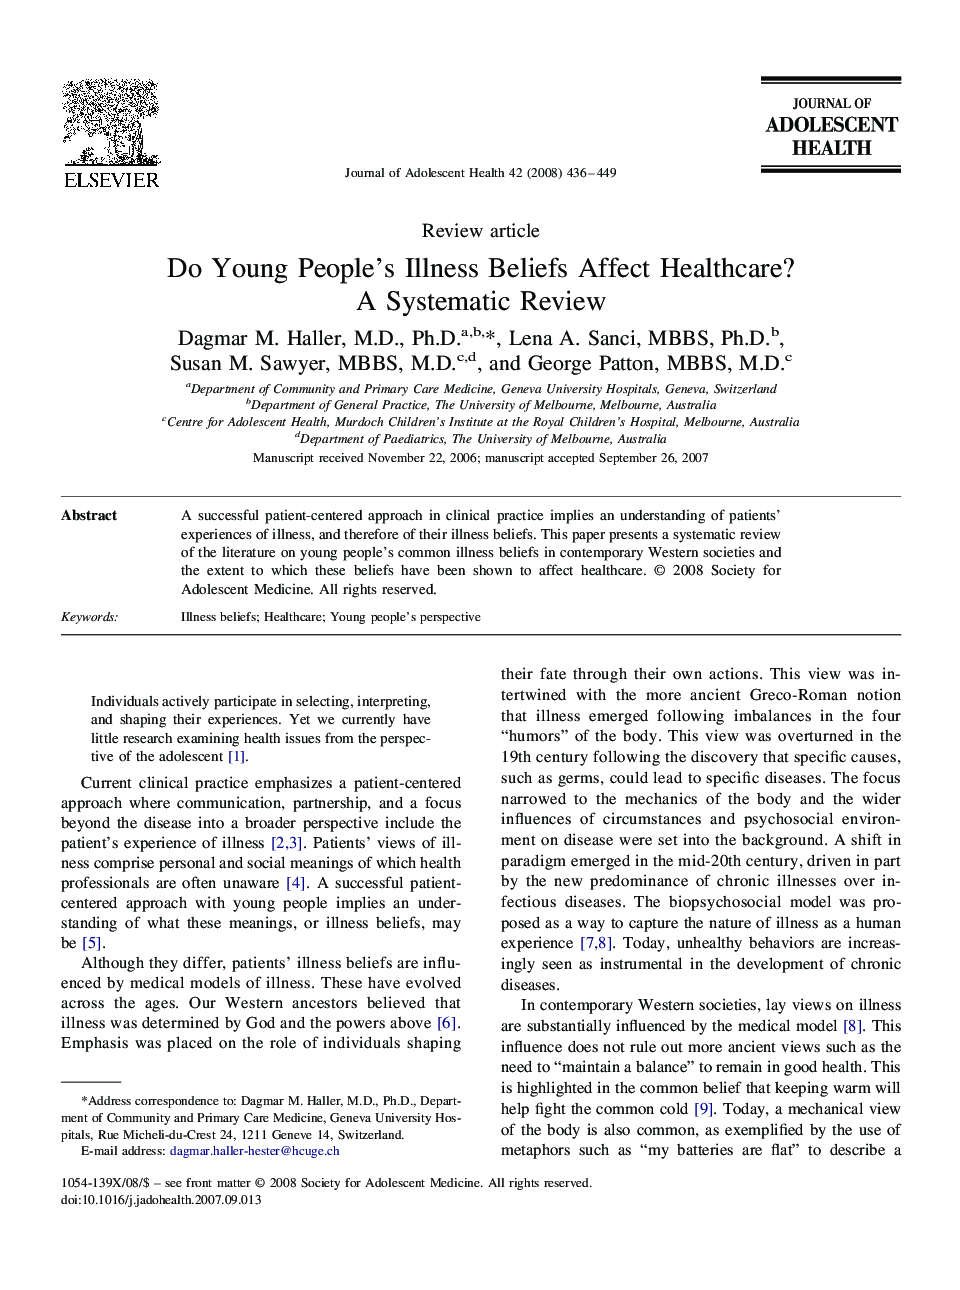 Do Young People's Illness Beliefs Affect Healthcare? A Systematic Review